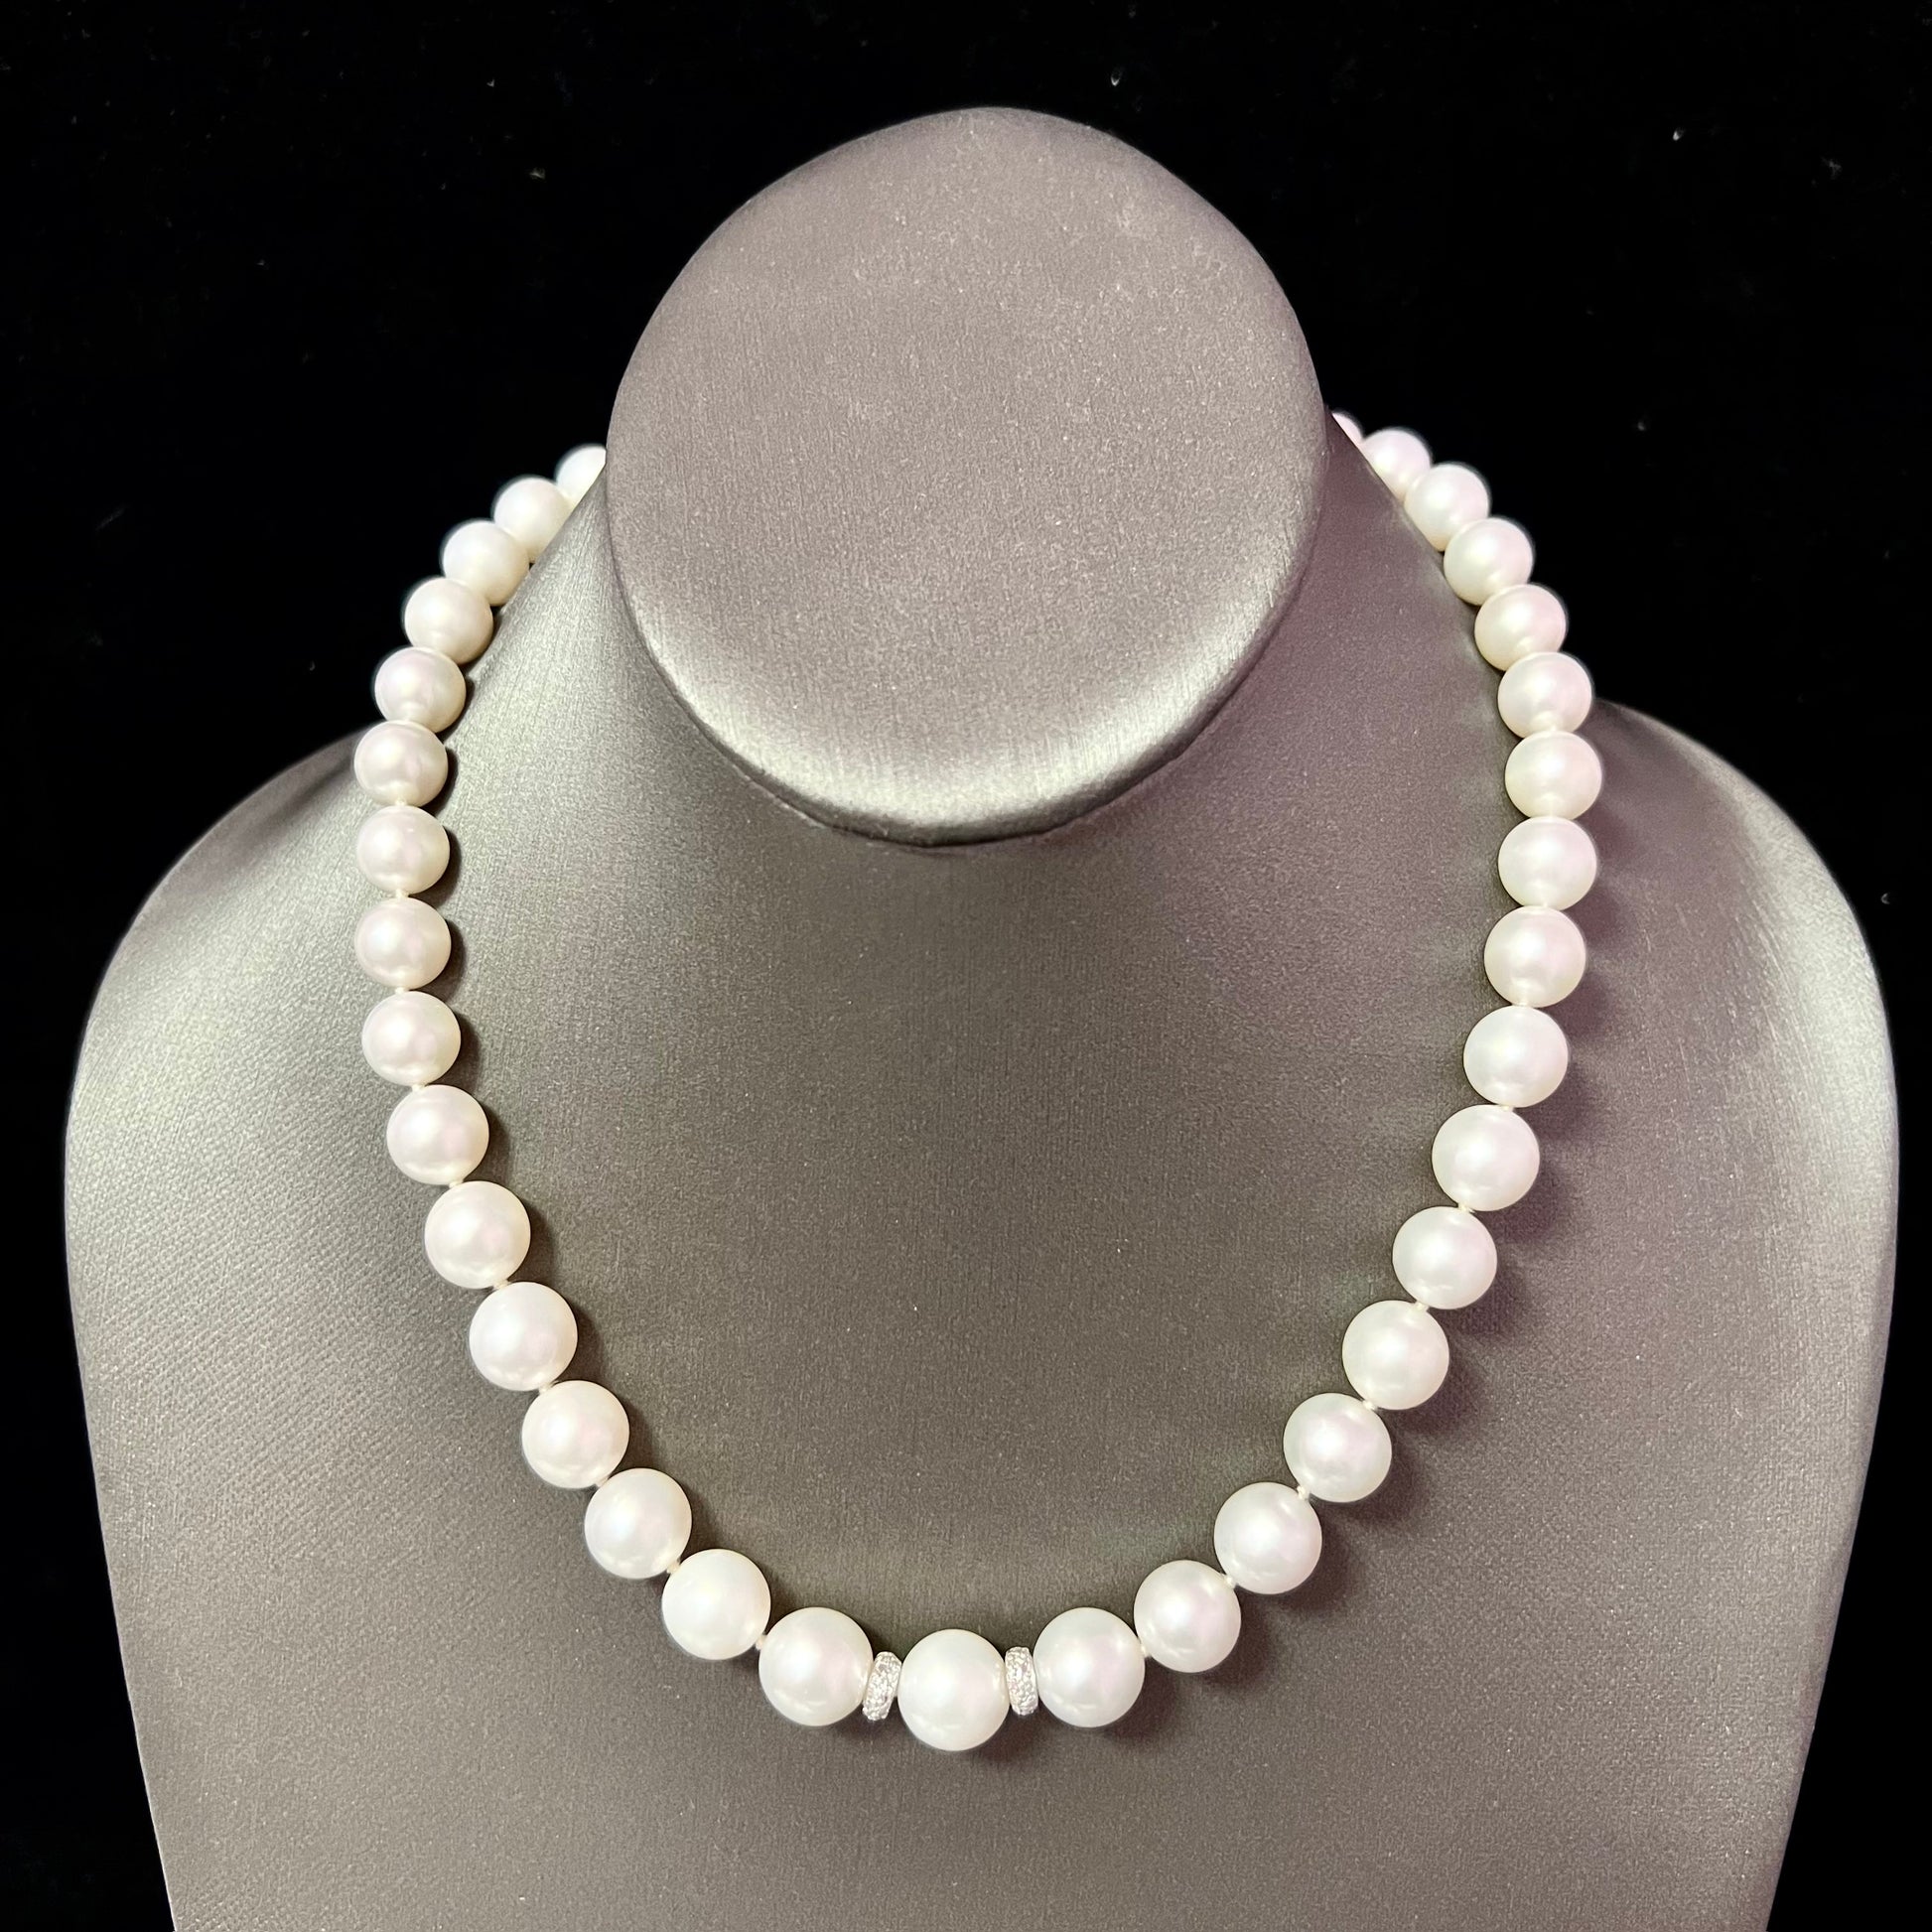 Natural South Sea Pearl Diamond Necklace 18" 14k W Gold 11 mm Certified $15,950 221248 - Certified Fine Jewelry